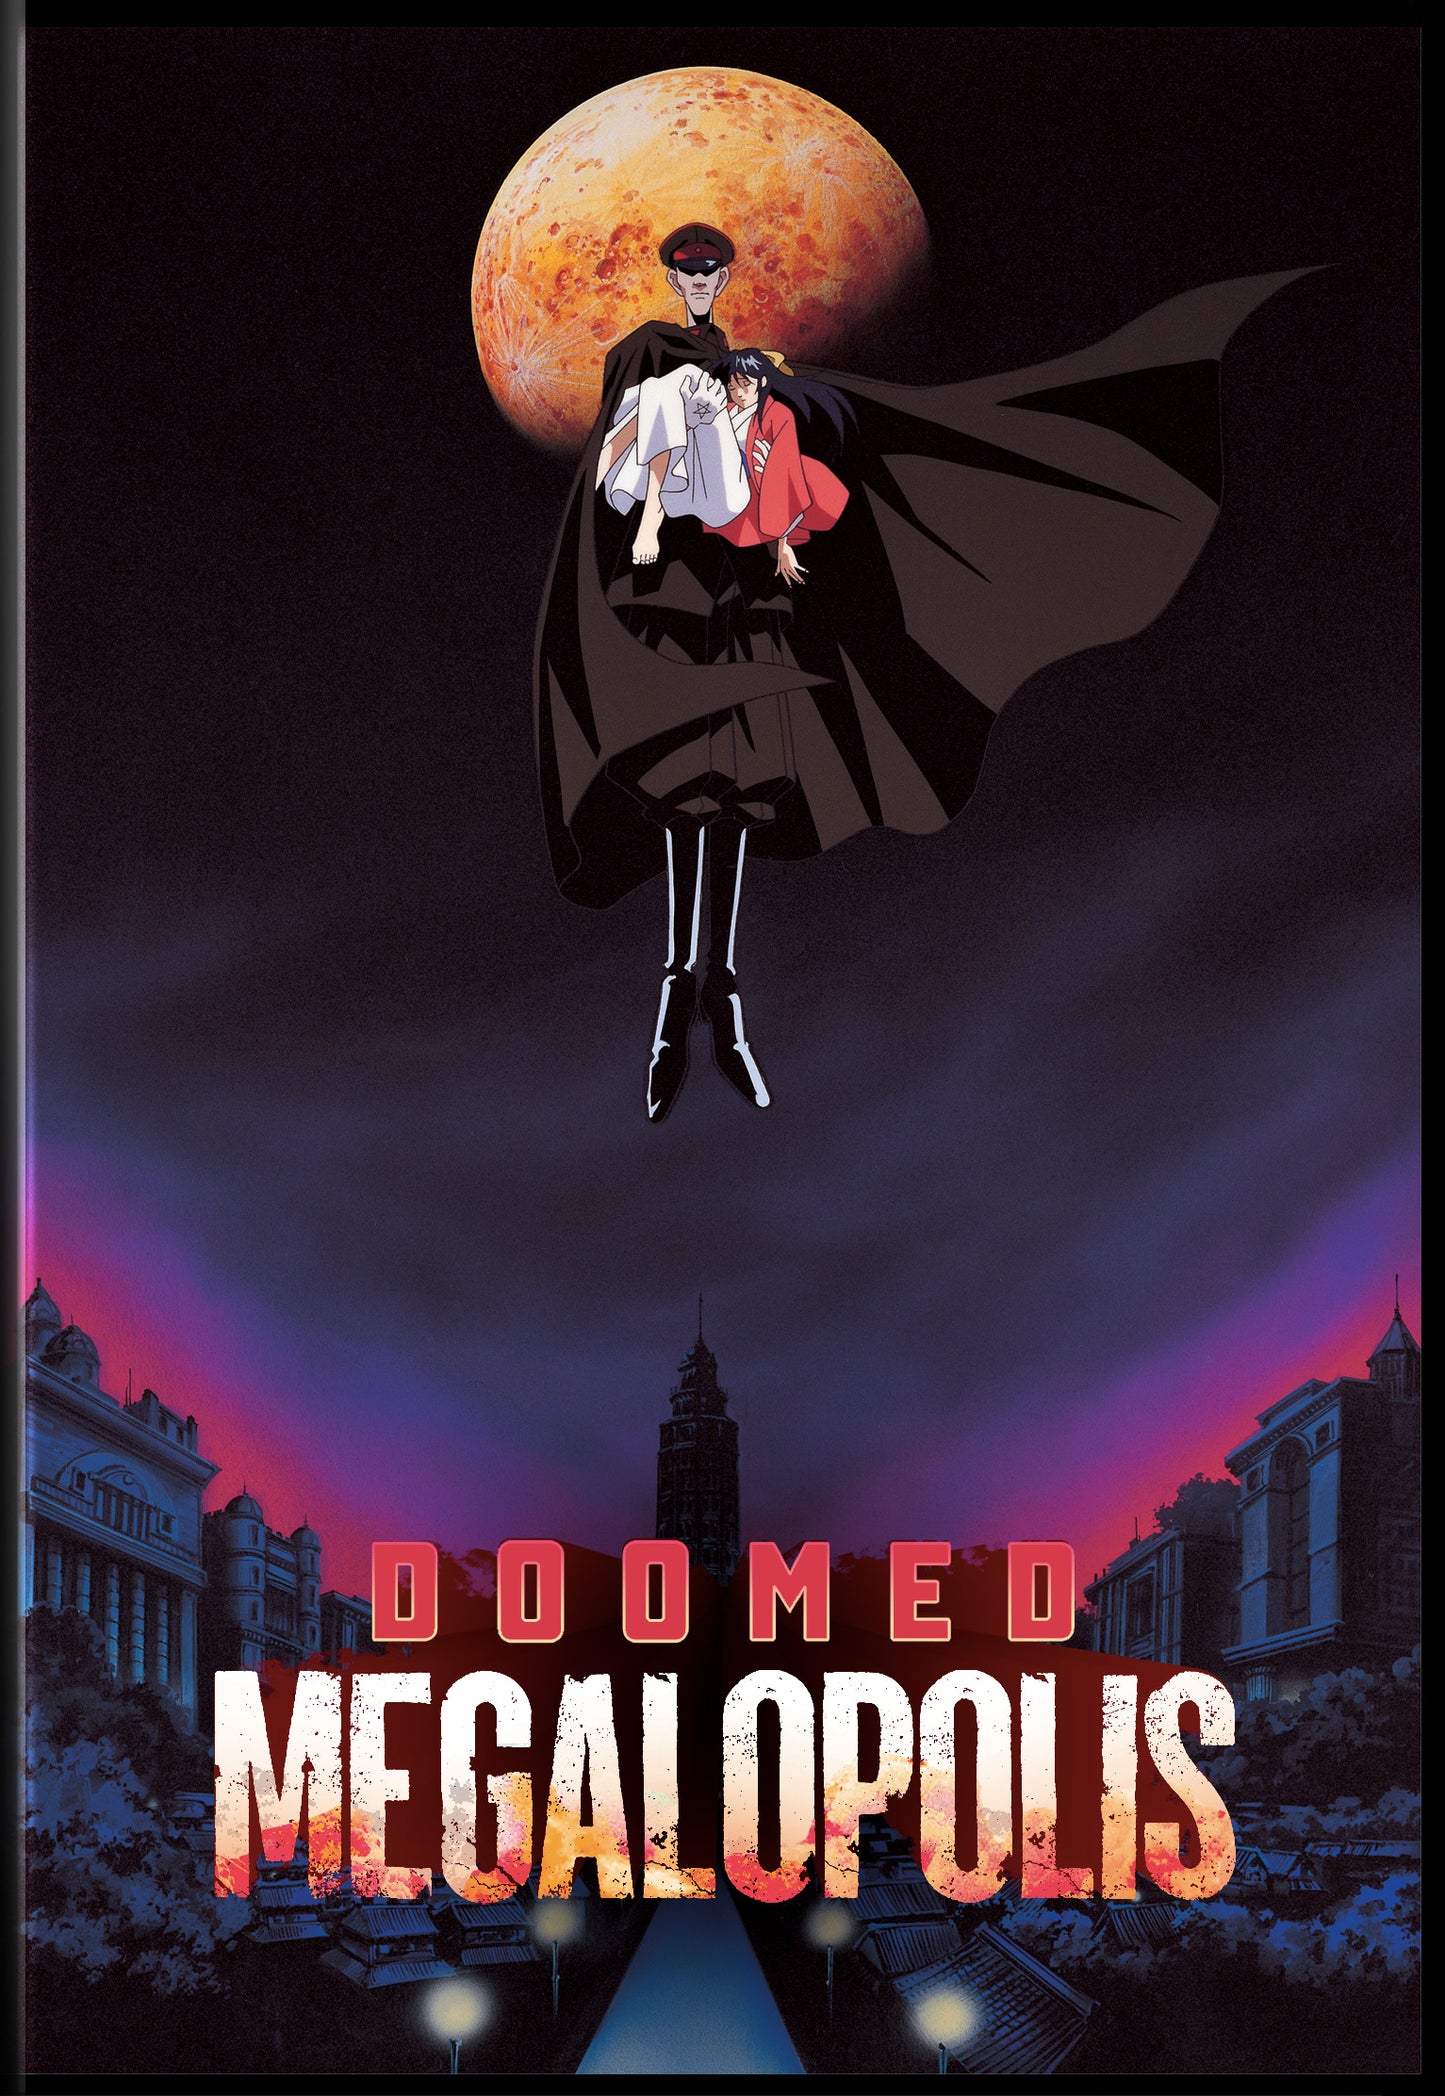 Doomed Megalopolis: An Occultist's Nightmare – OTAQUEST